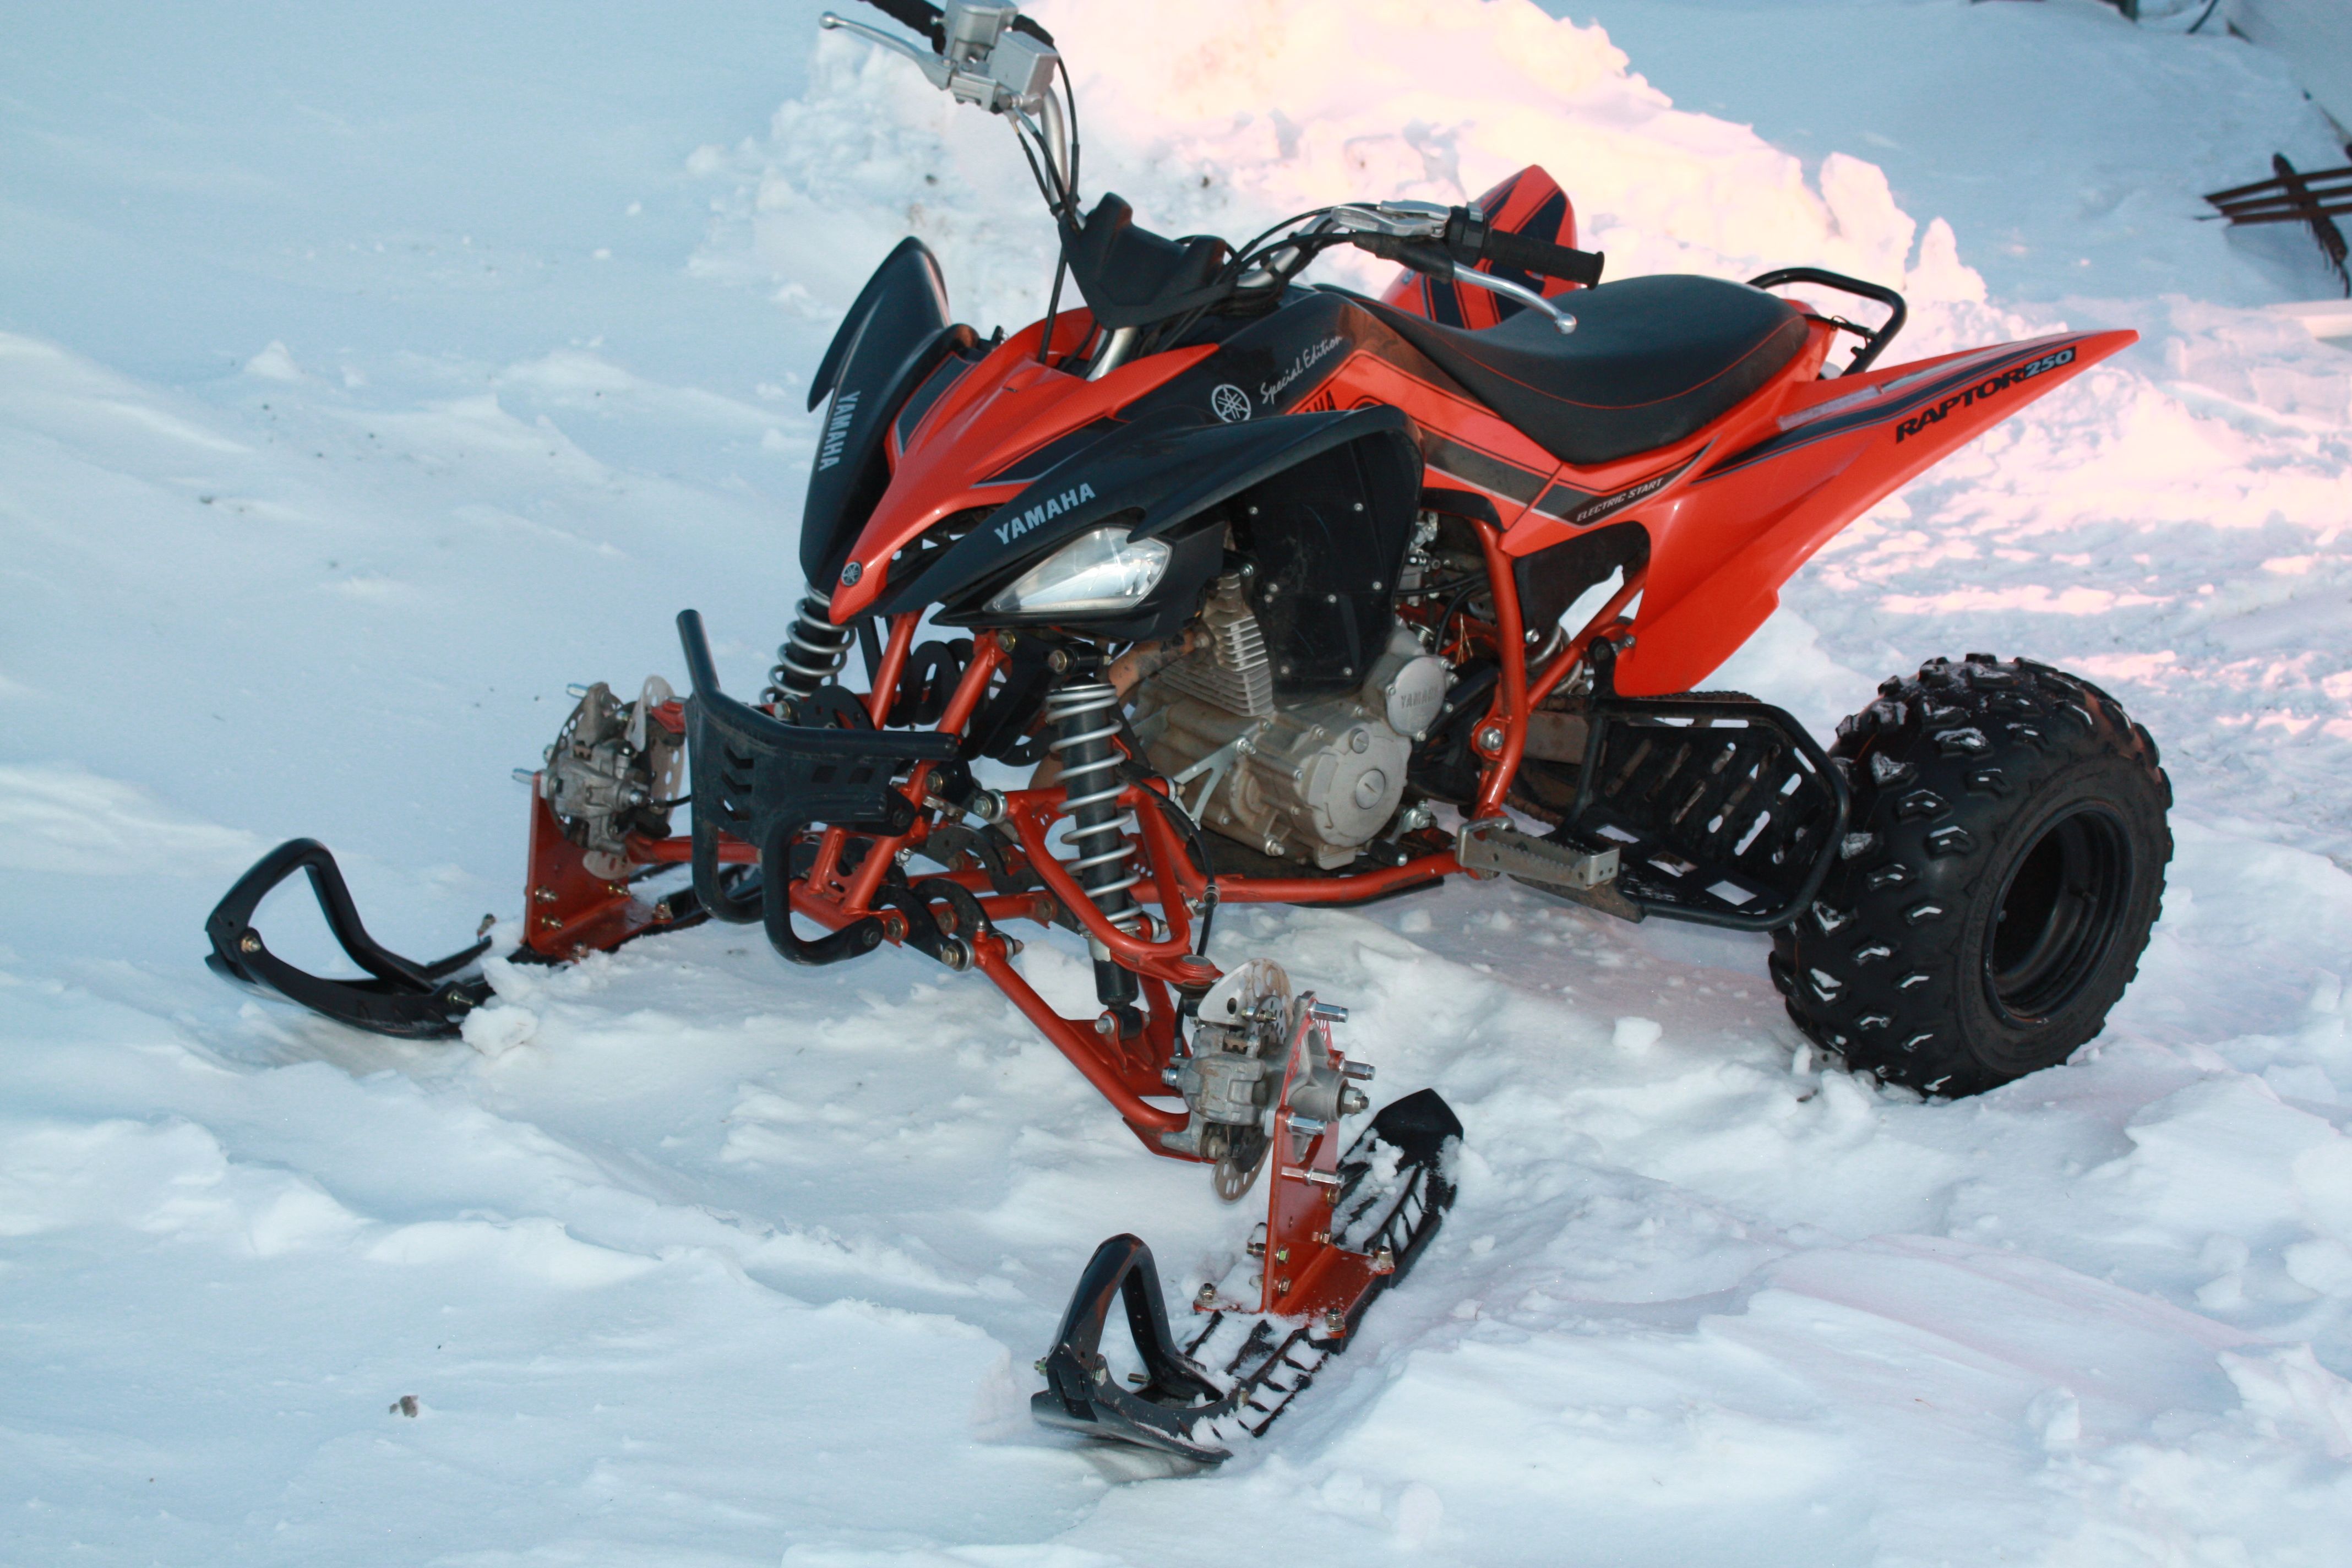 snowmobile wallpapers | WallpaperUP